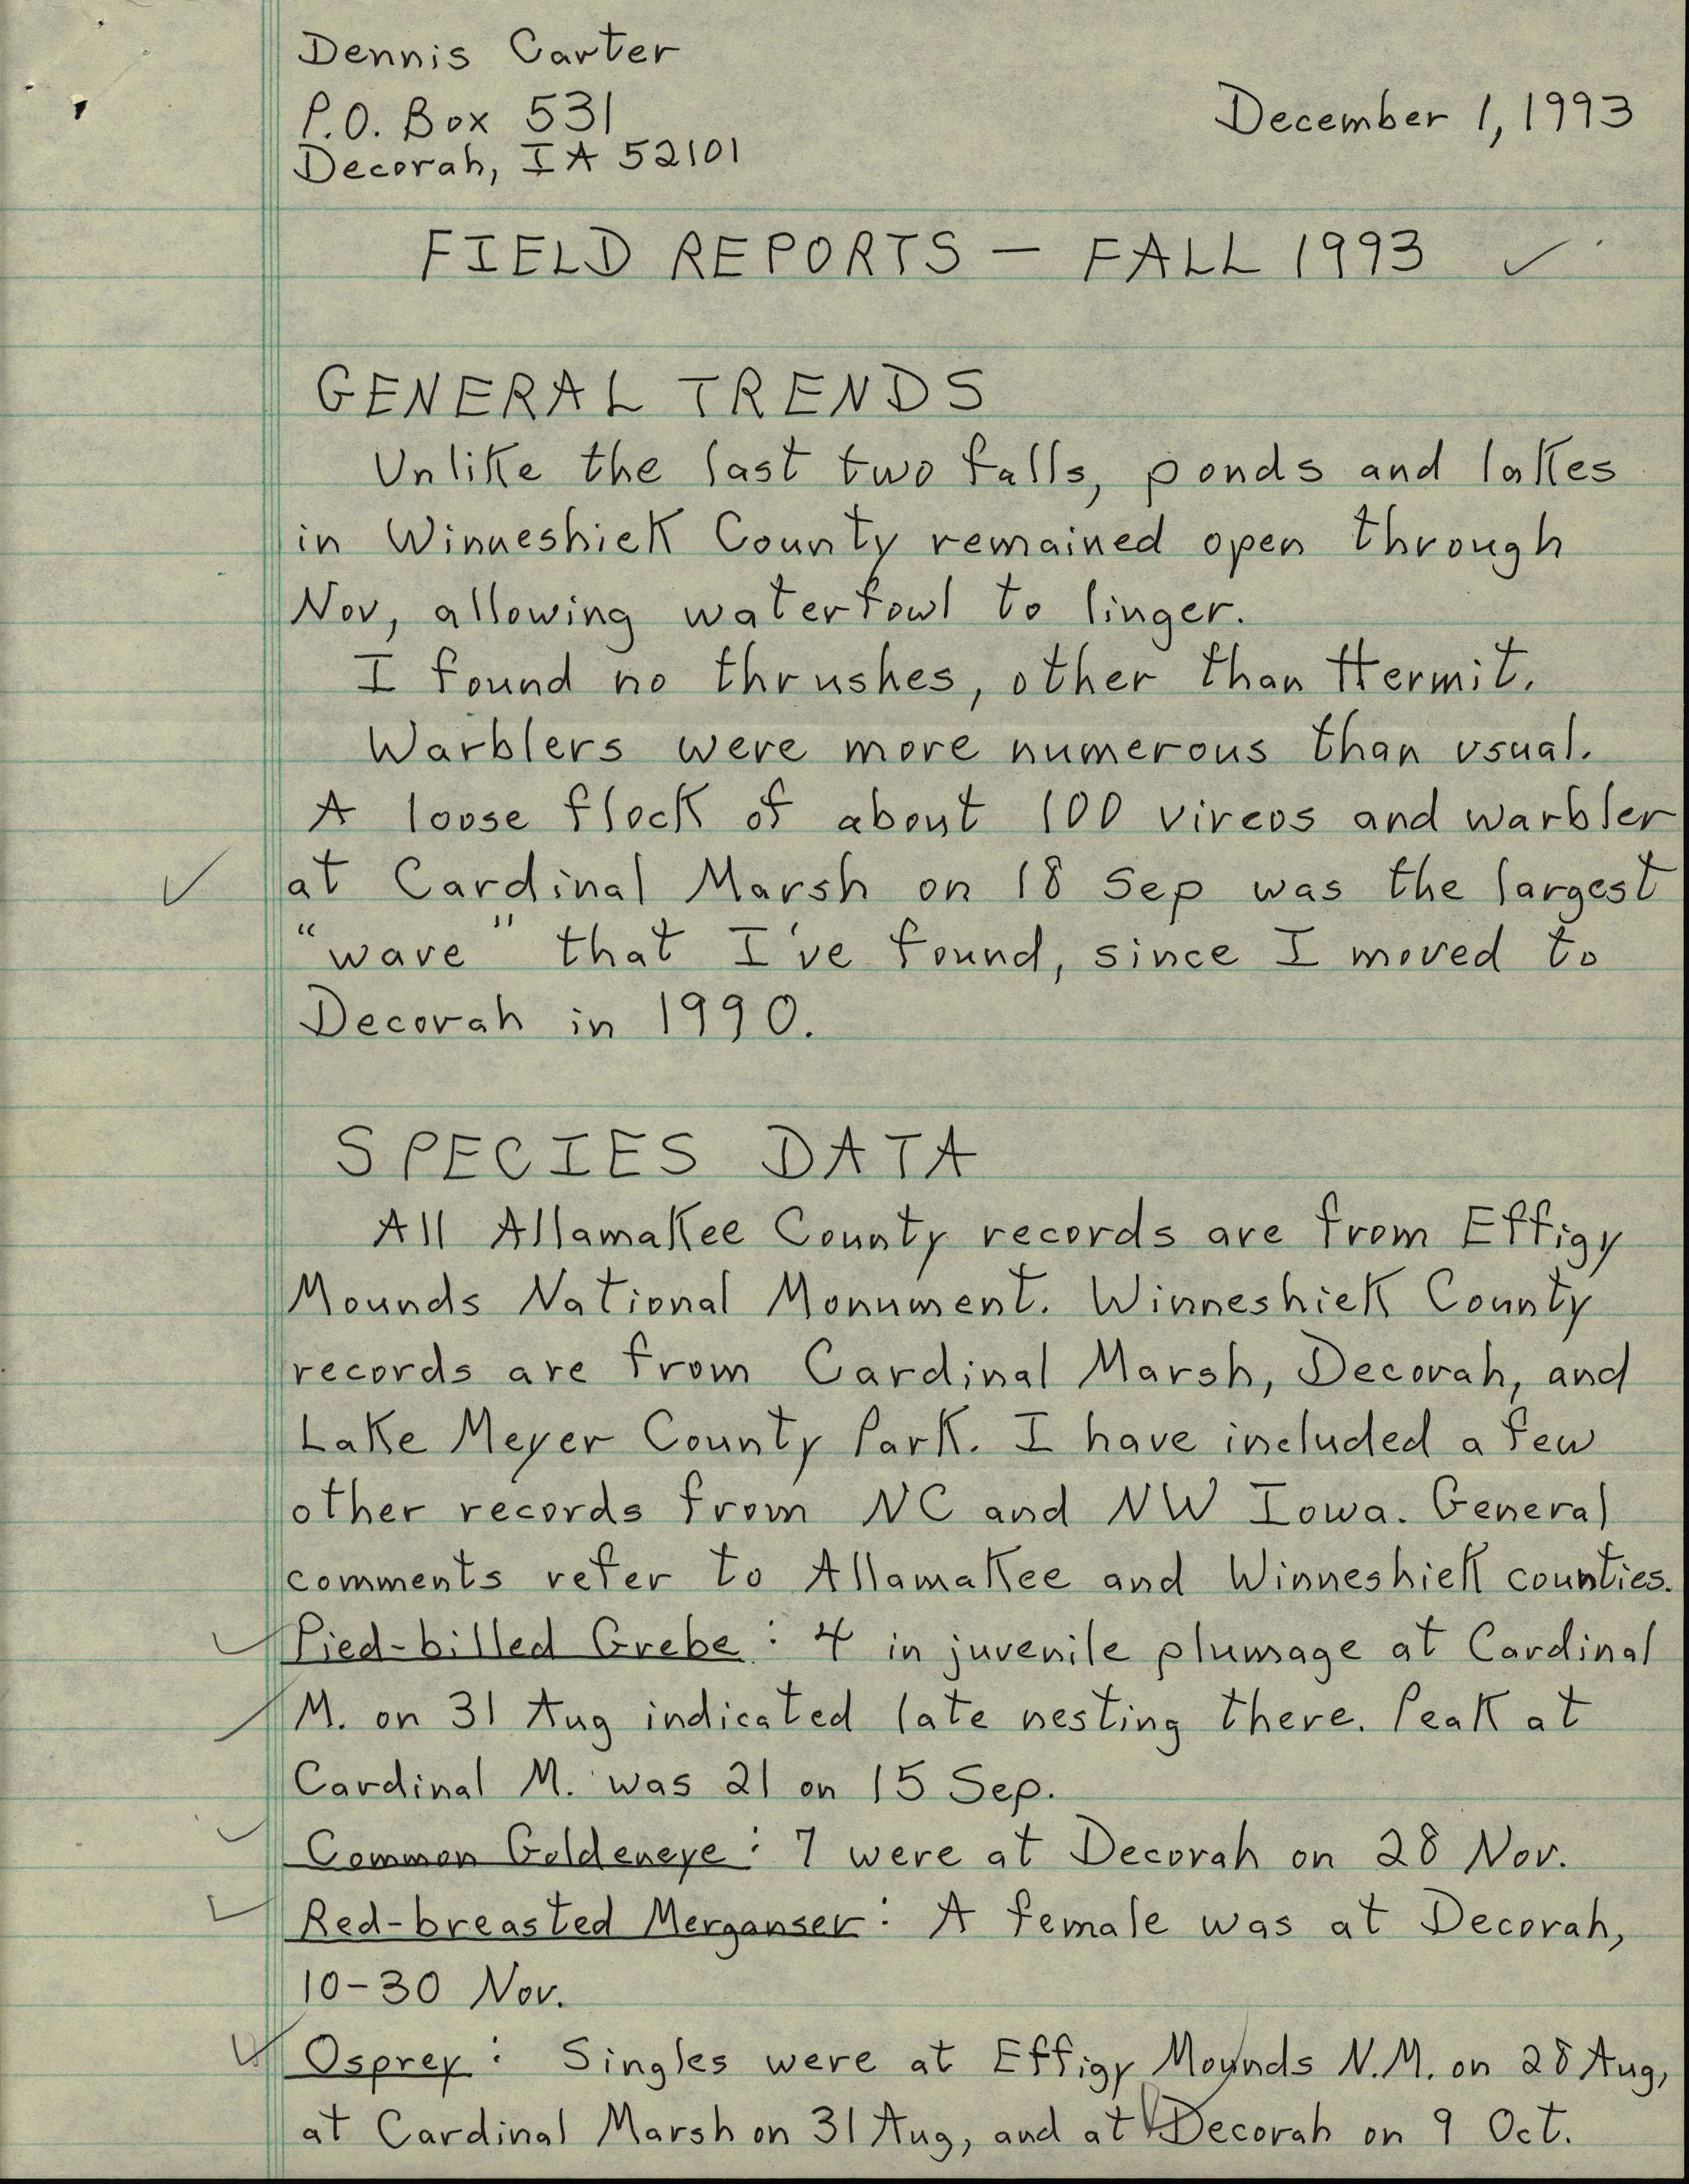 Field notes contributed by Dennis L. Carter, December 1, 1993